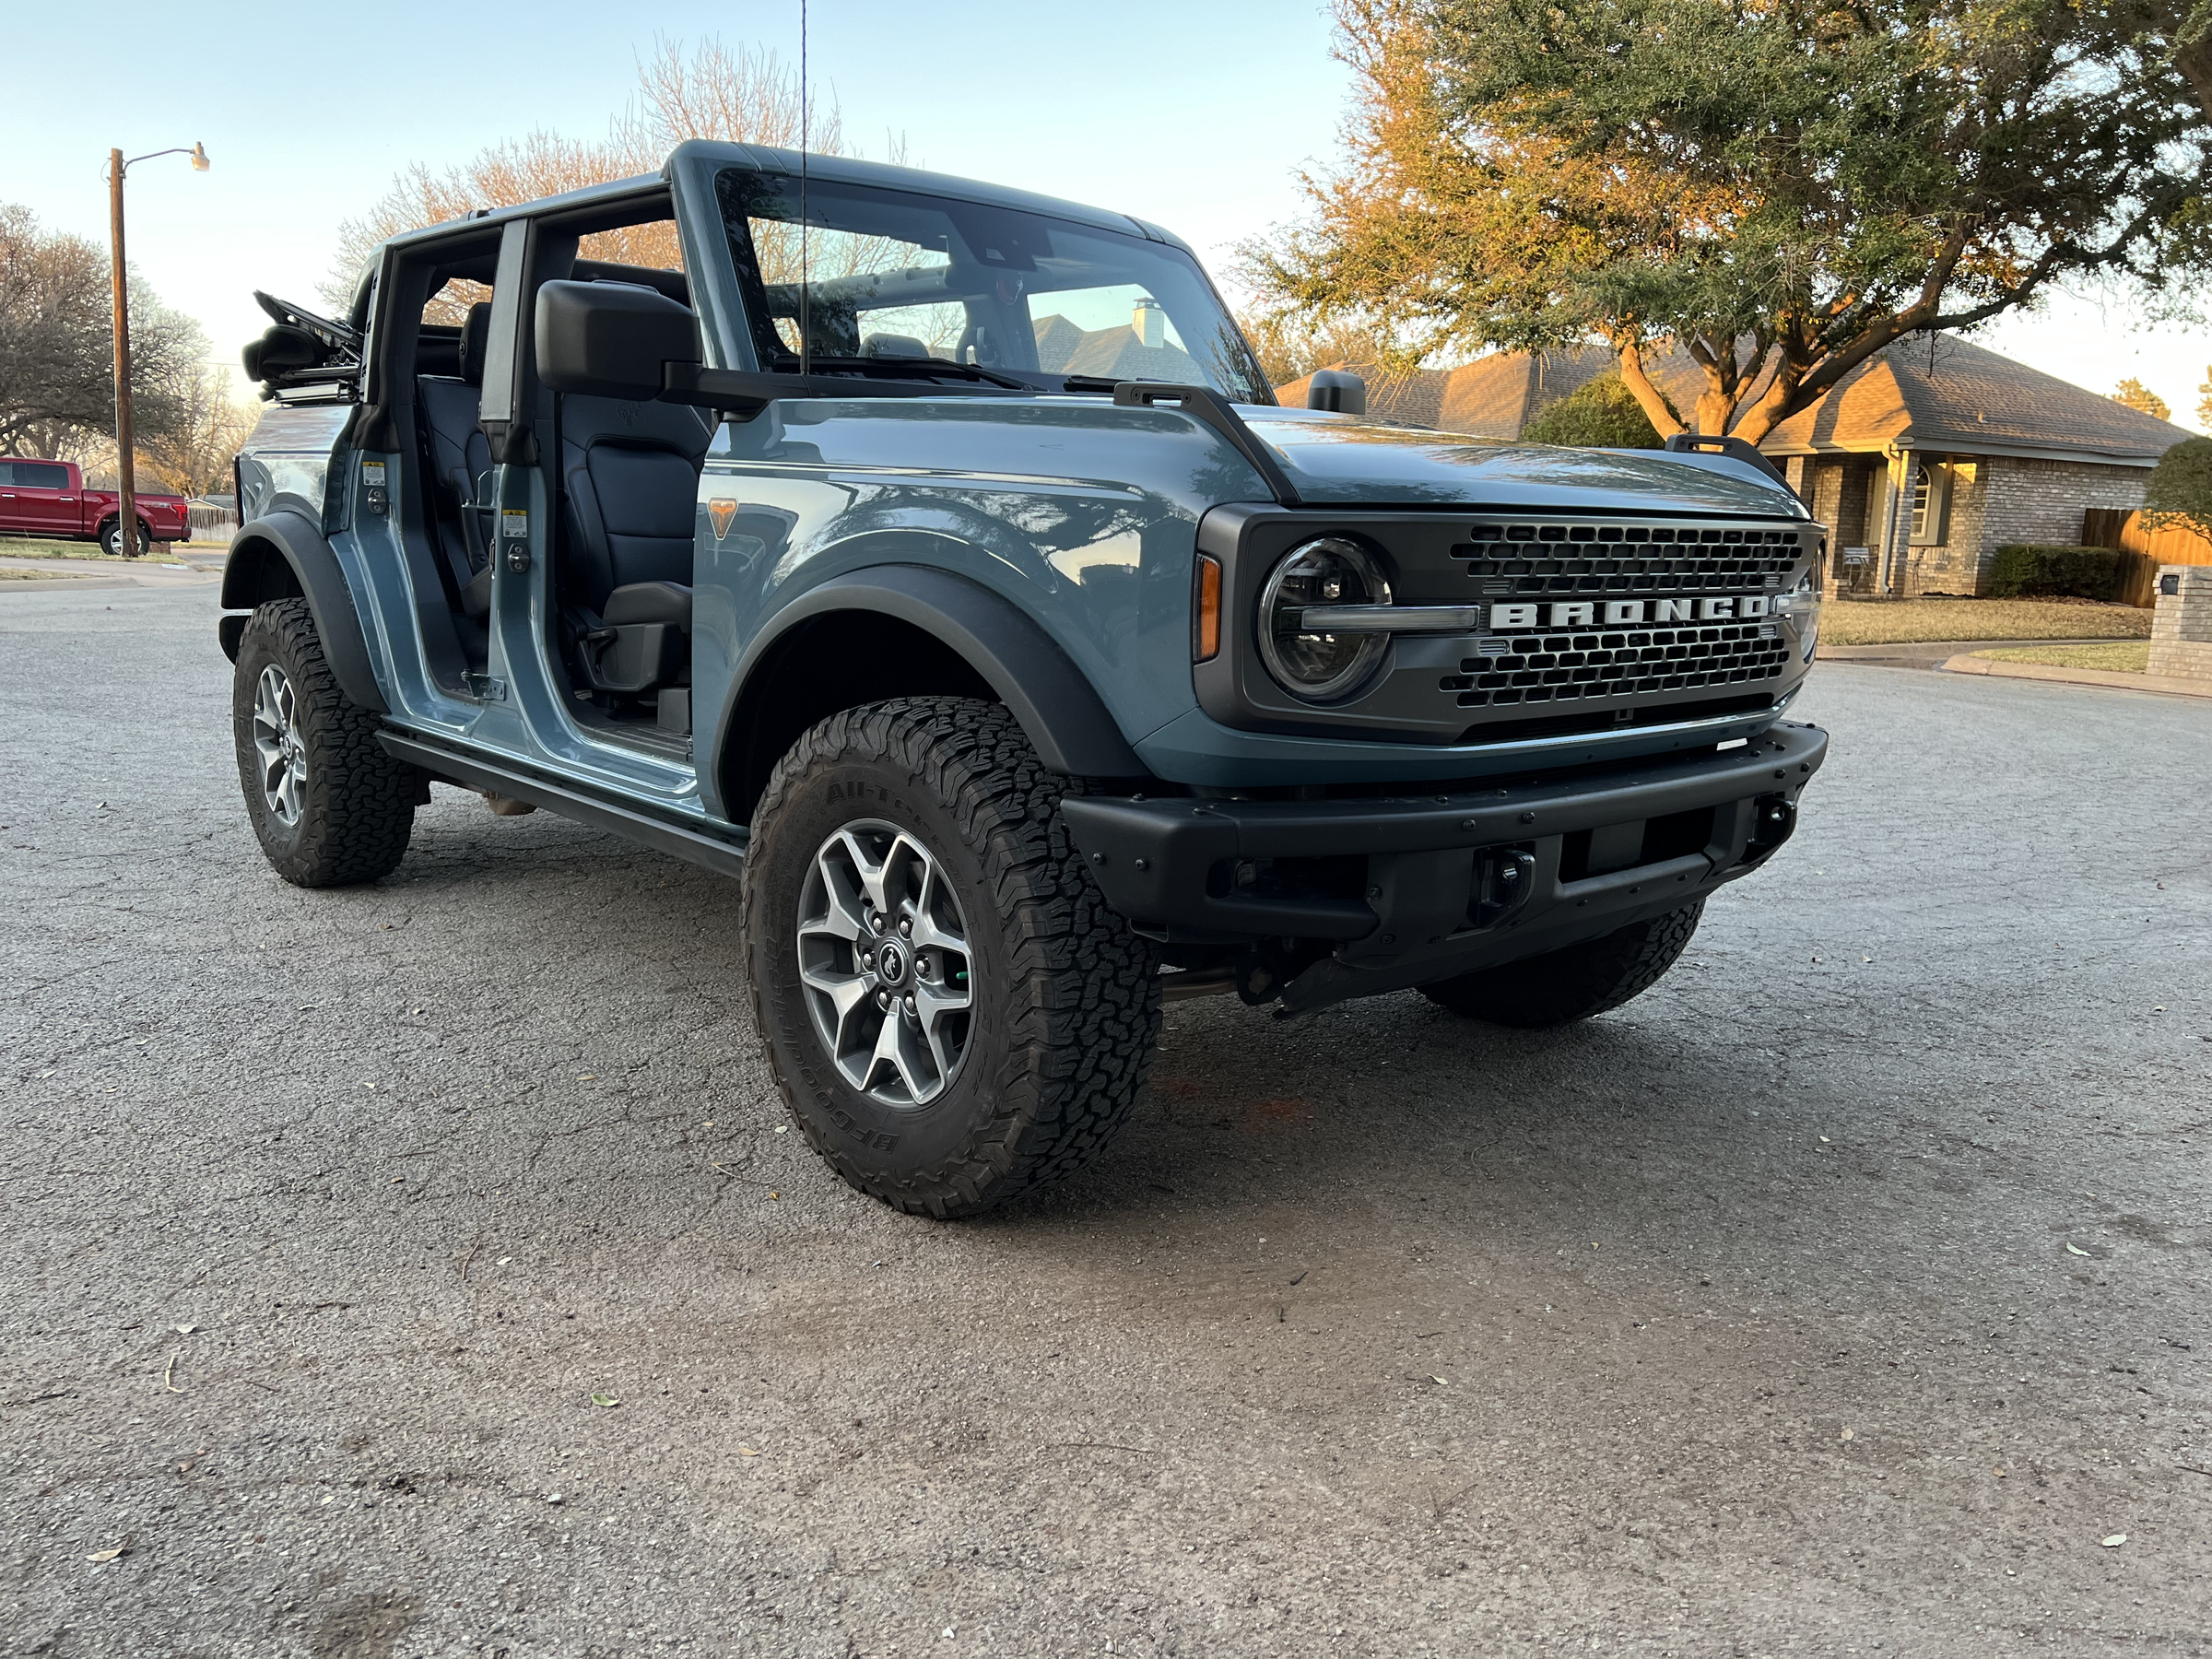 Topless Doorless Experience Comparison Bronco vs Jeep Wrangler (by owner of  both) | Bronco6G - 2021+ Ford Bronco & Bronco Raptor Forum, News, Blog &  Owners Community